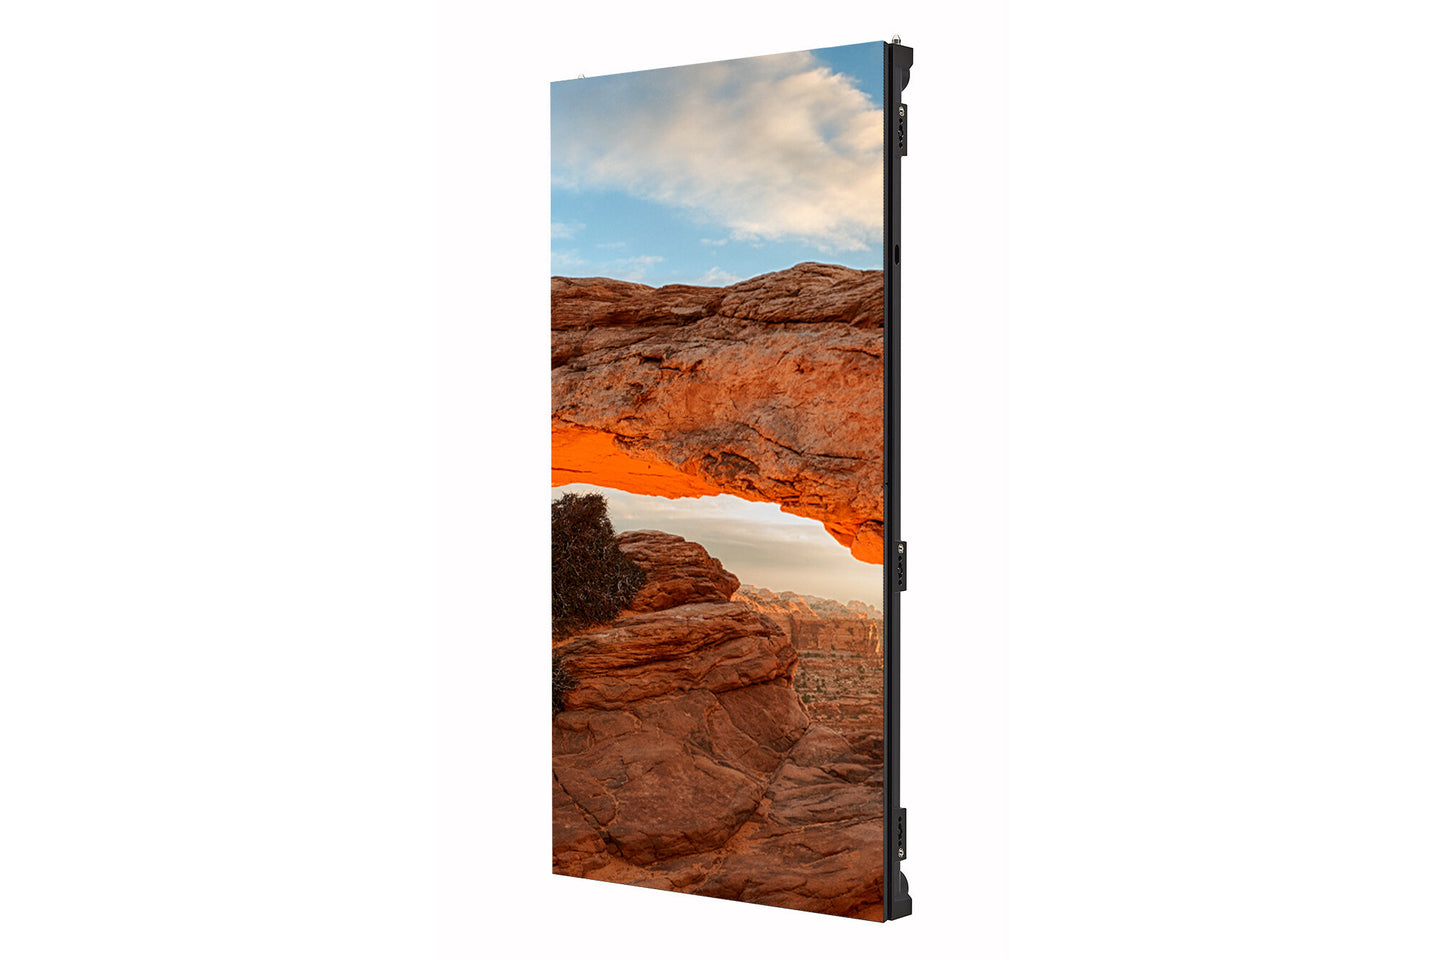 GSCA046 Outdoor LED, 4.63 mm Pixel Pitch